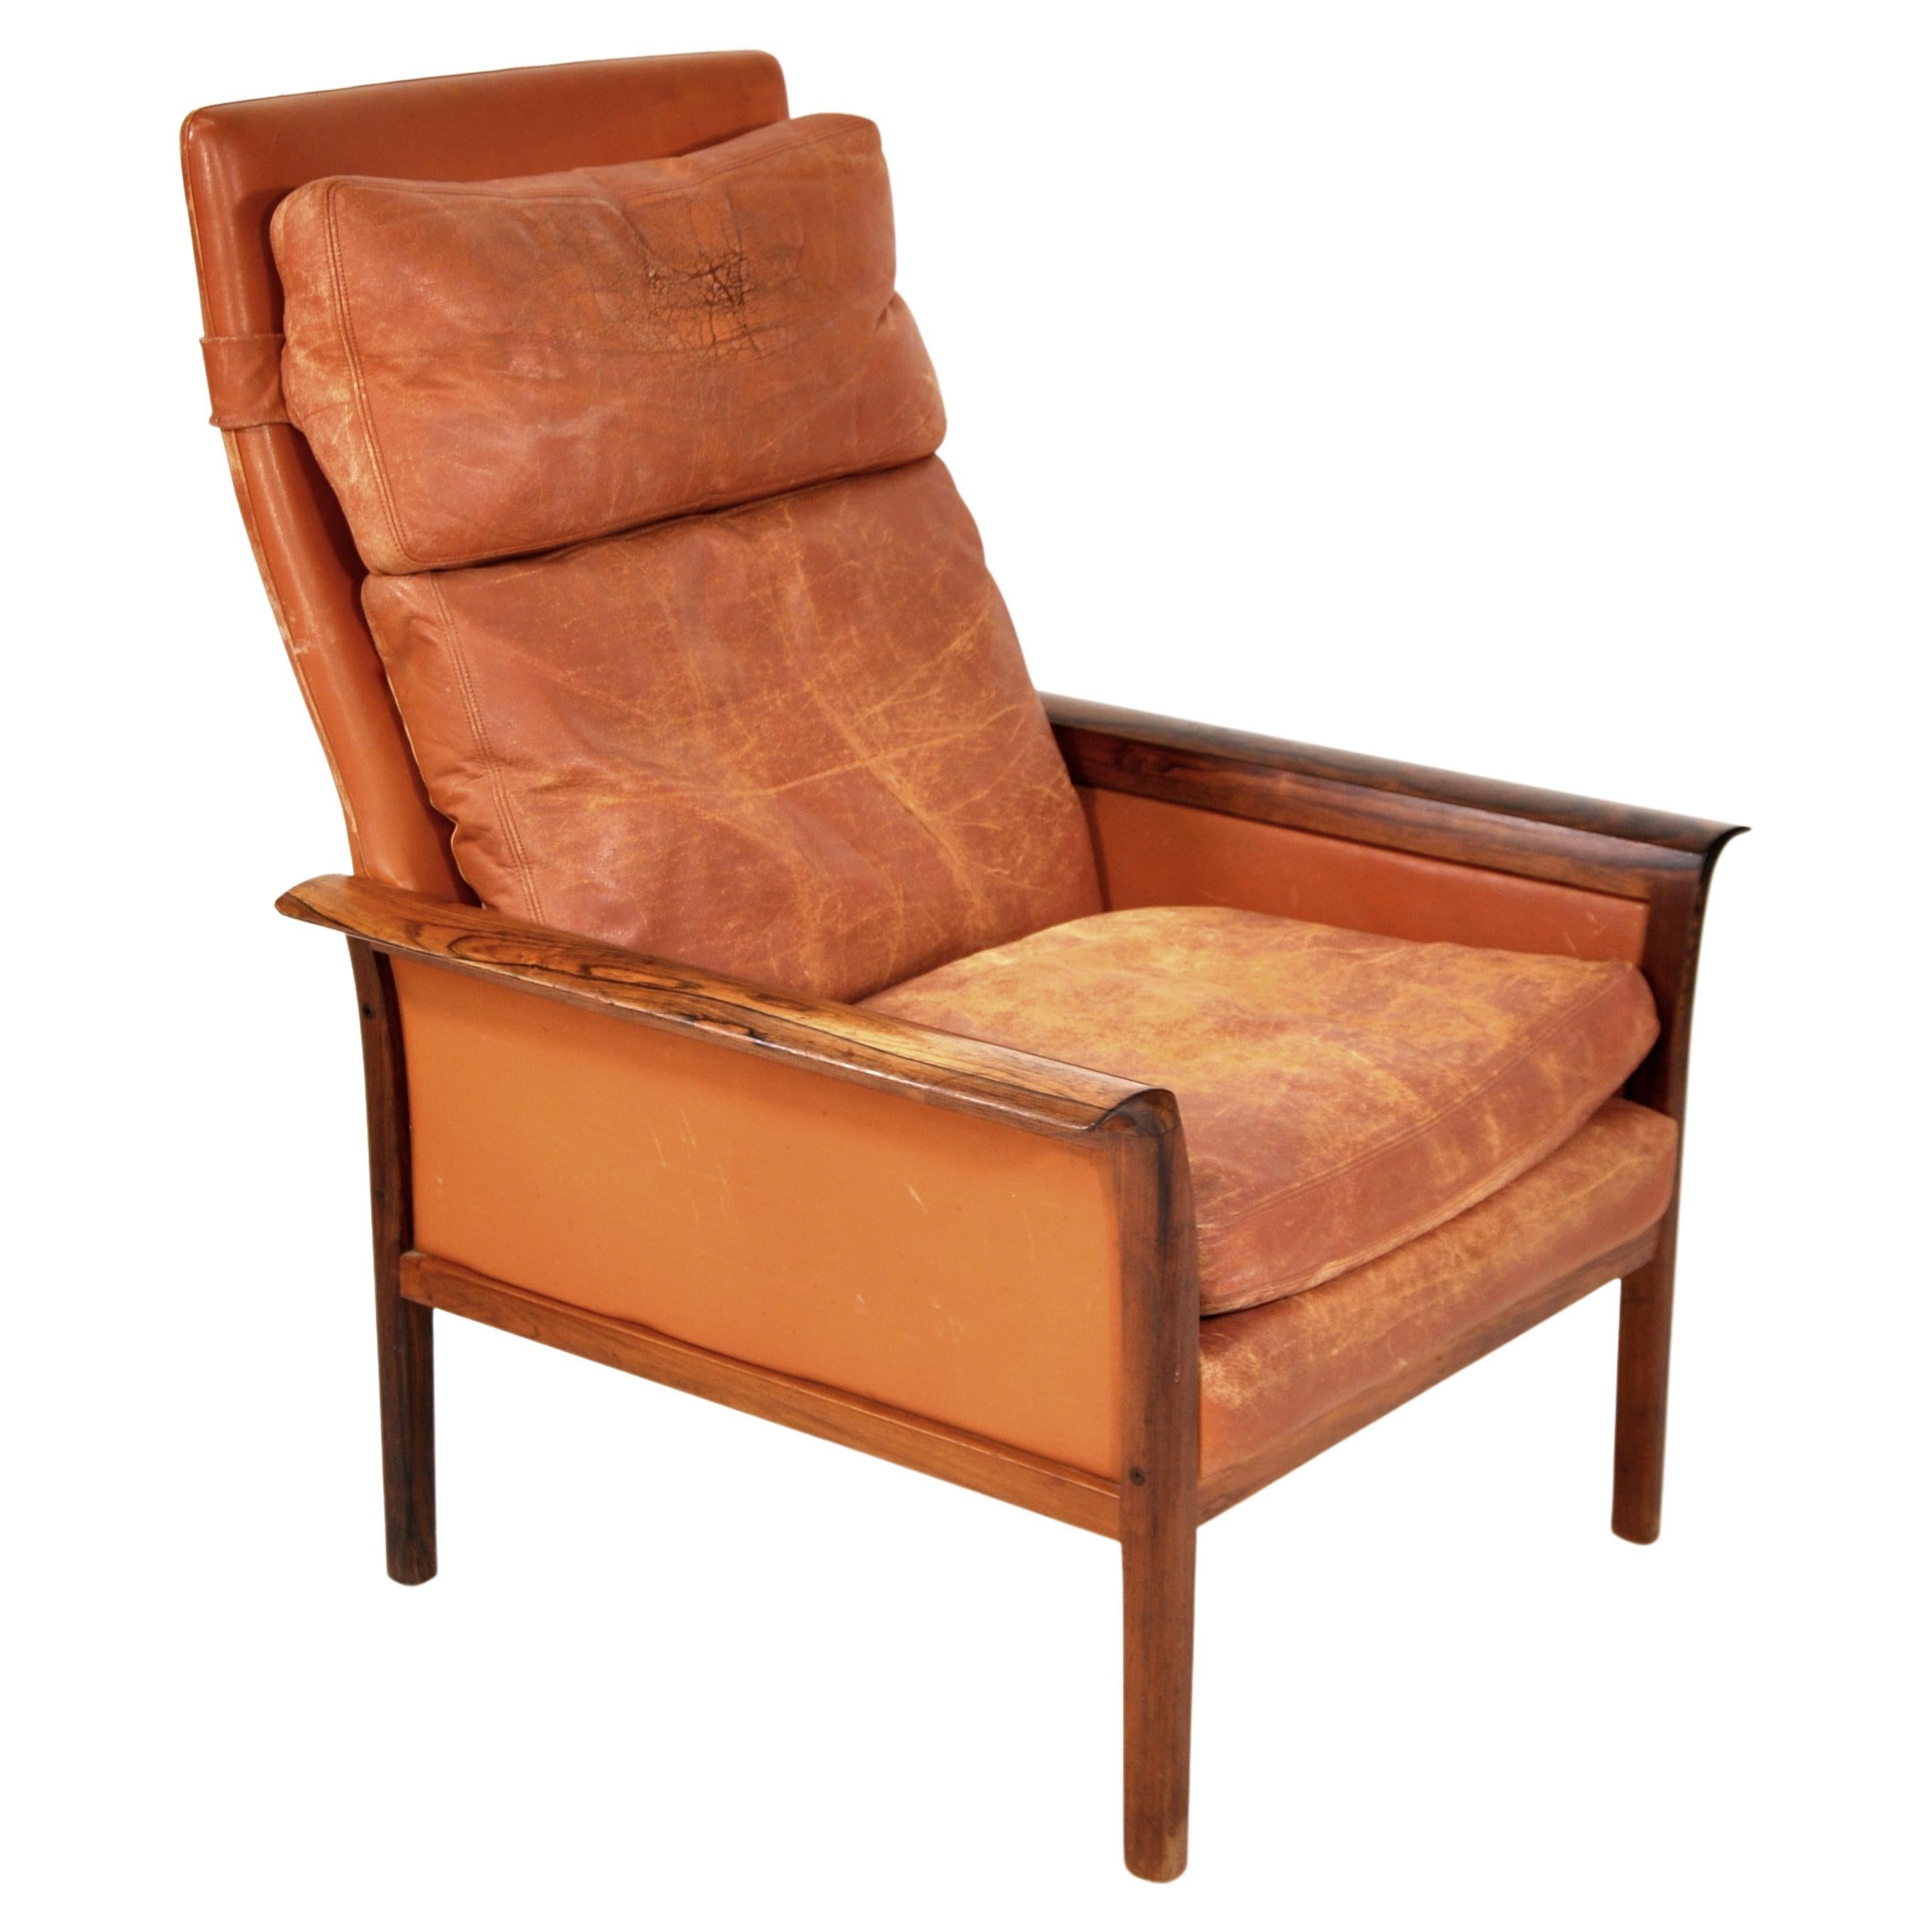 Rosewood Cognac Leather Chairs with Ottoman, by Fredrik Kayser for Vatne Mobler 1